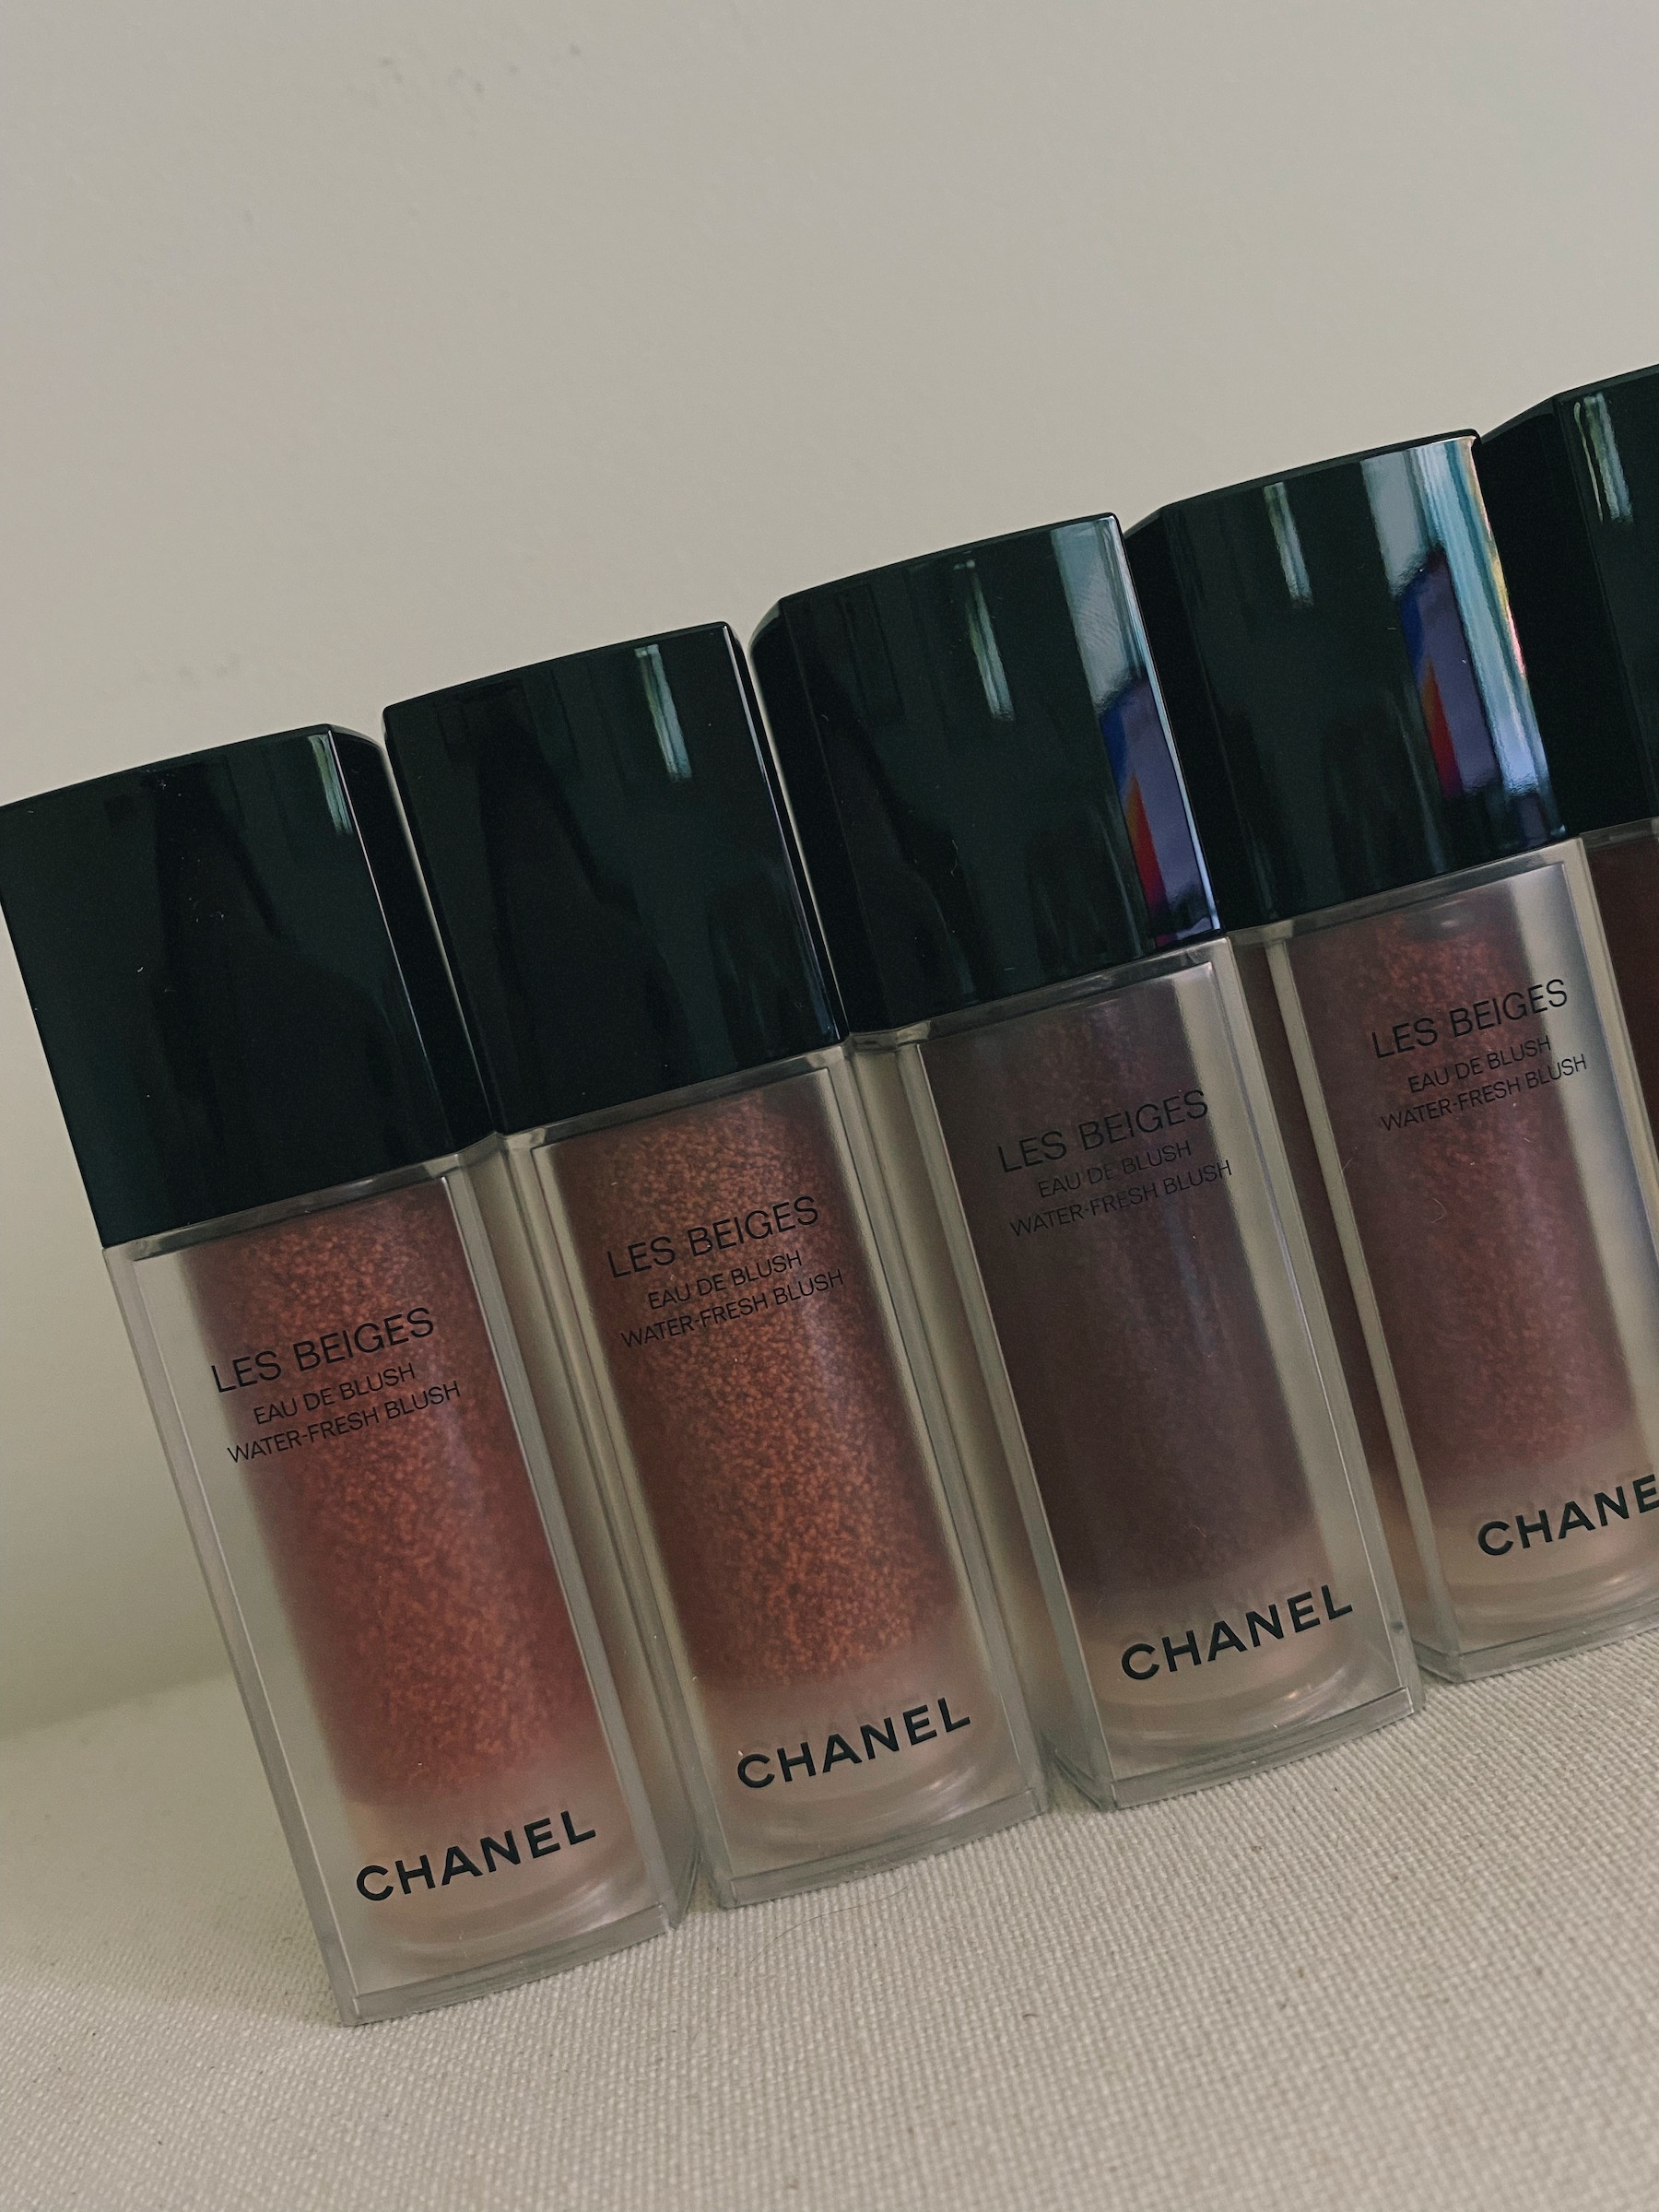 Chanel Les Beiges Summer Collection: A quick review — Covet & Acquire